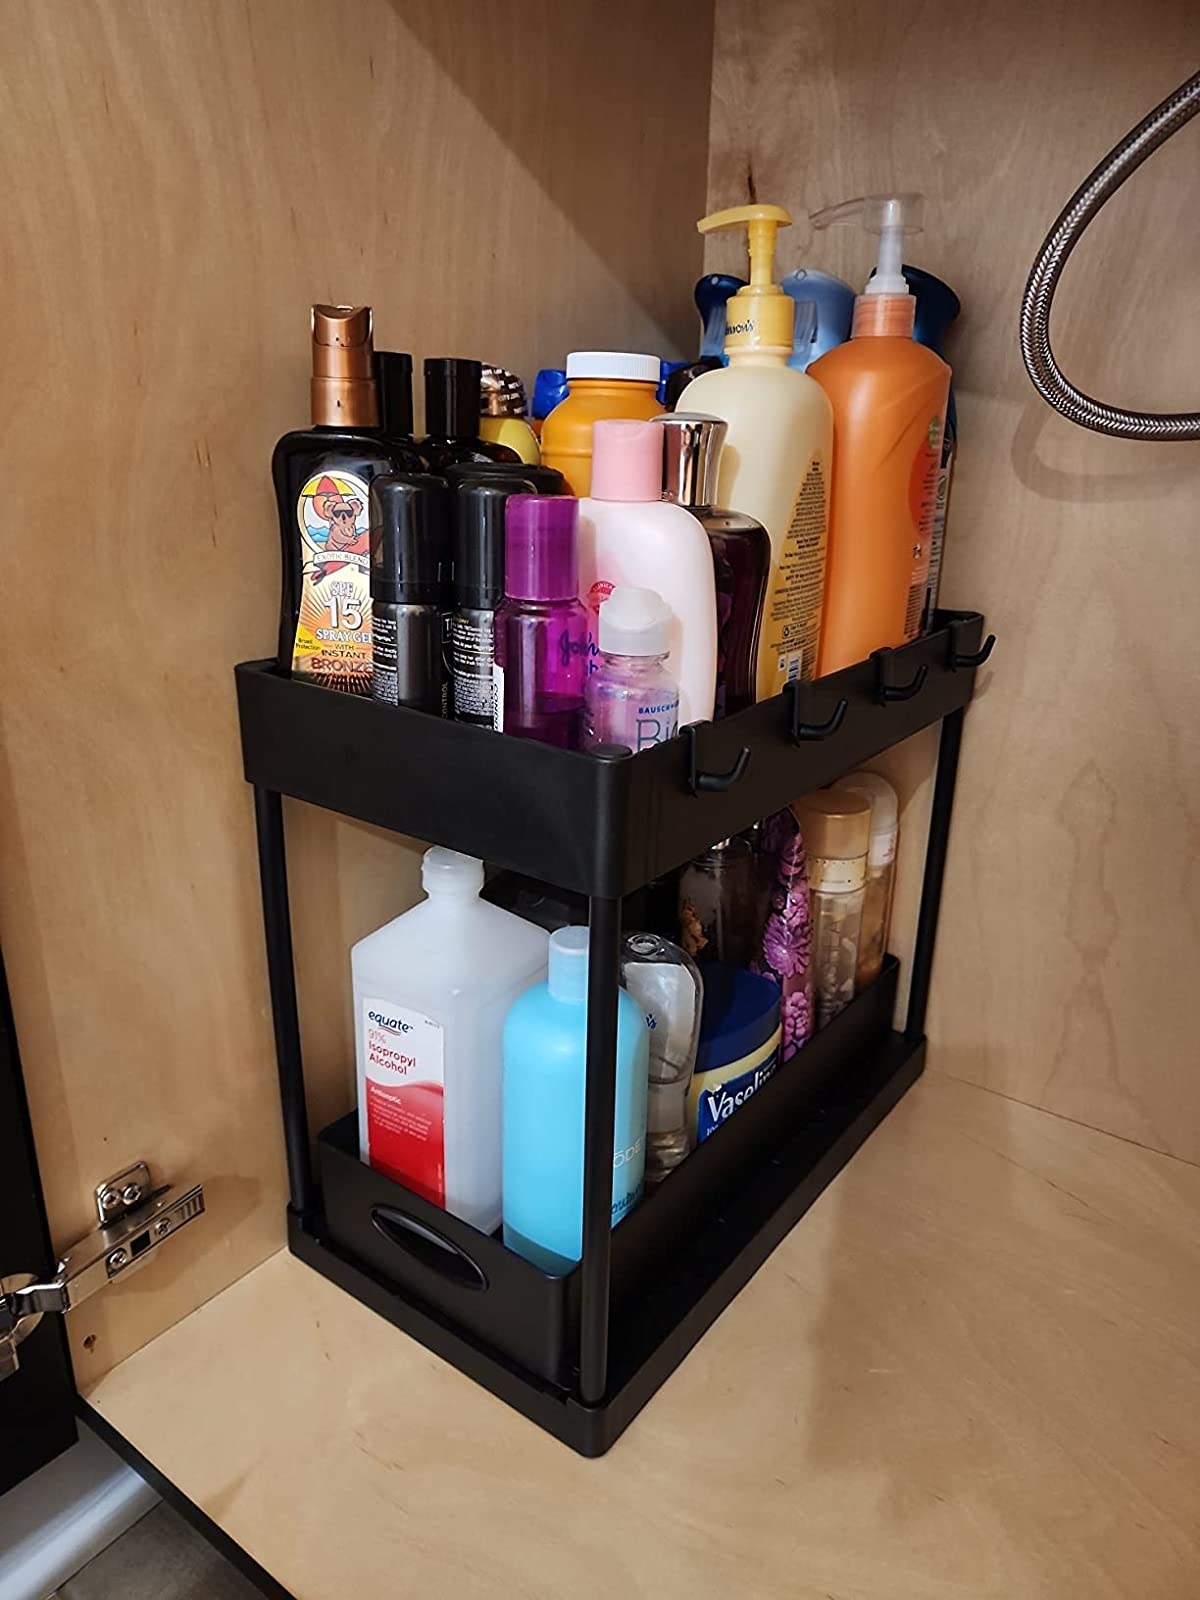 A black storage organizer filled with various personal care products in a wooden cabinet